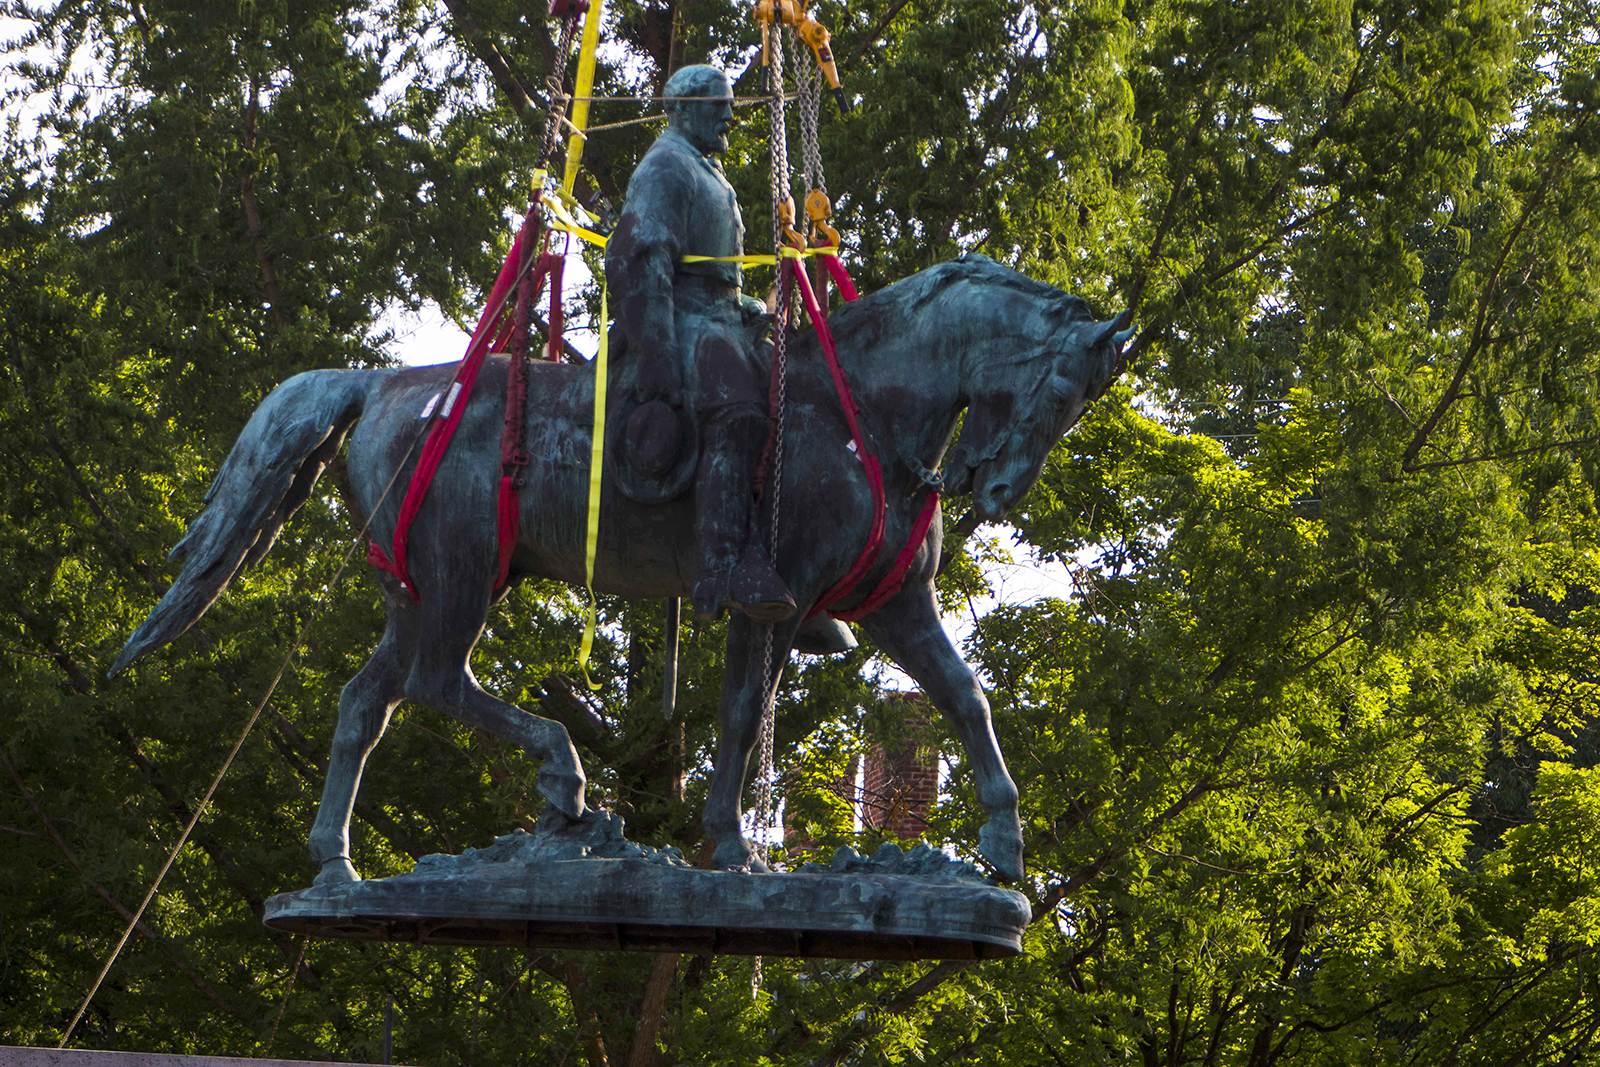 Workers remove the monument of Confederate General Robert E. Lee on Saturday, July 10, 2021 in Charlottesville, Va. The removal of the Lee statue follows years of contention, community anguish and legal fights. (AP Photo/John C. Clark)